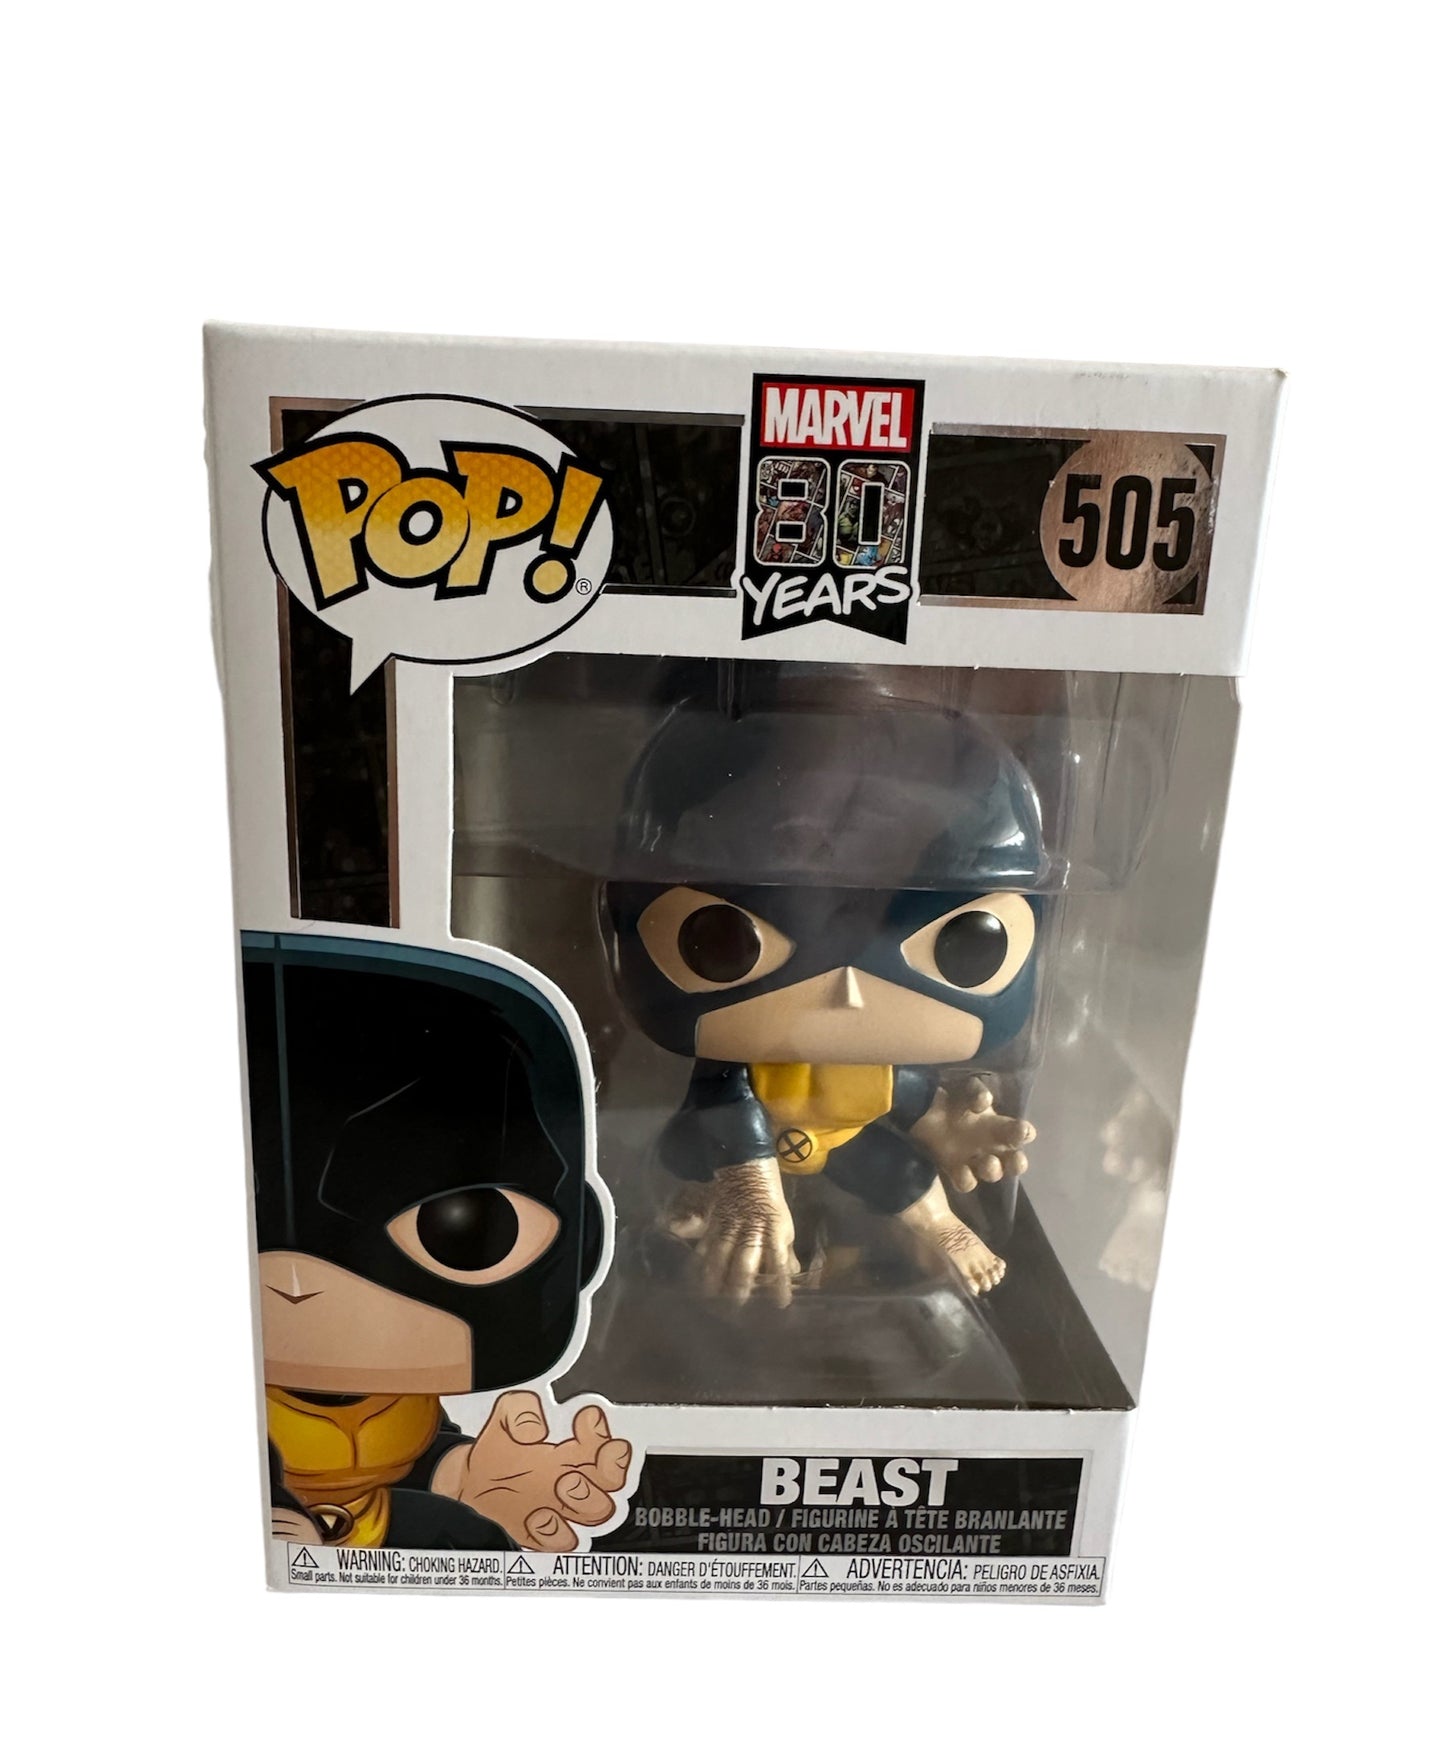 POP! 2019 Marvels 80 Years First Appearance Pop Vinyl Figure - The Beast Bobble-Head No. 505 - Brand New Shop Stock Room Find